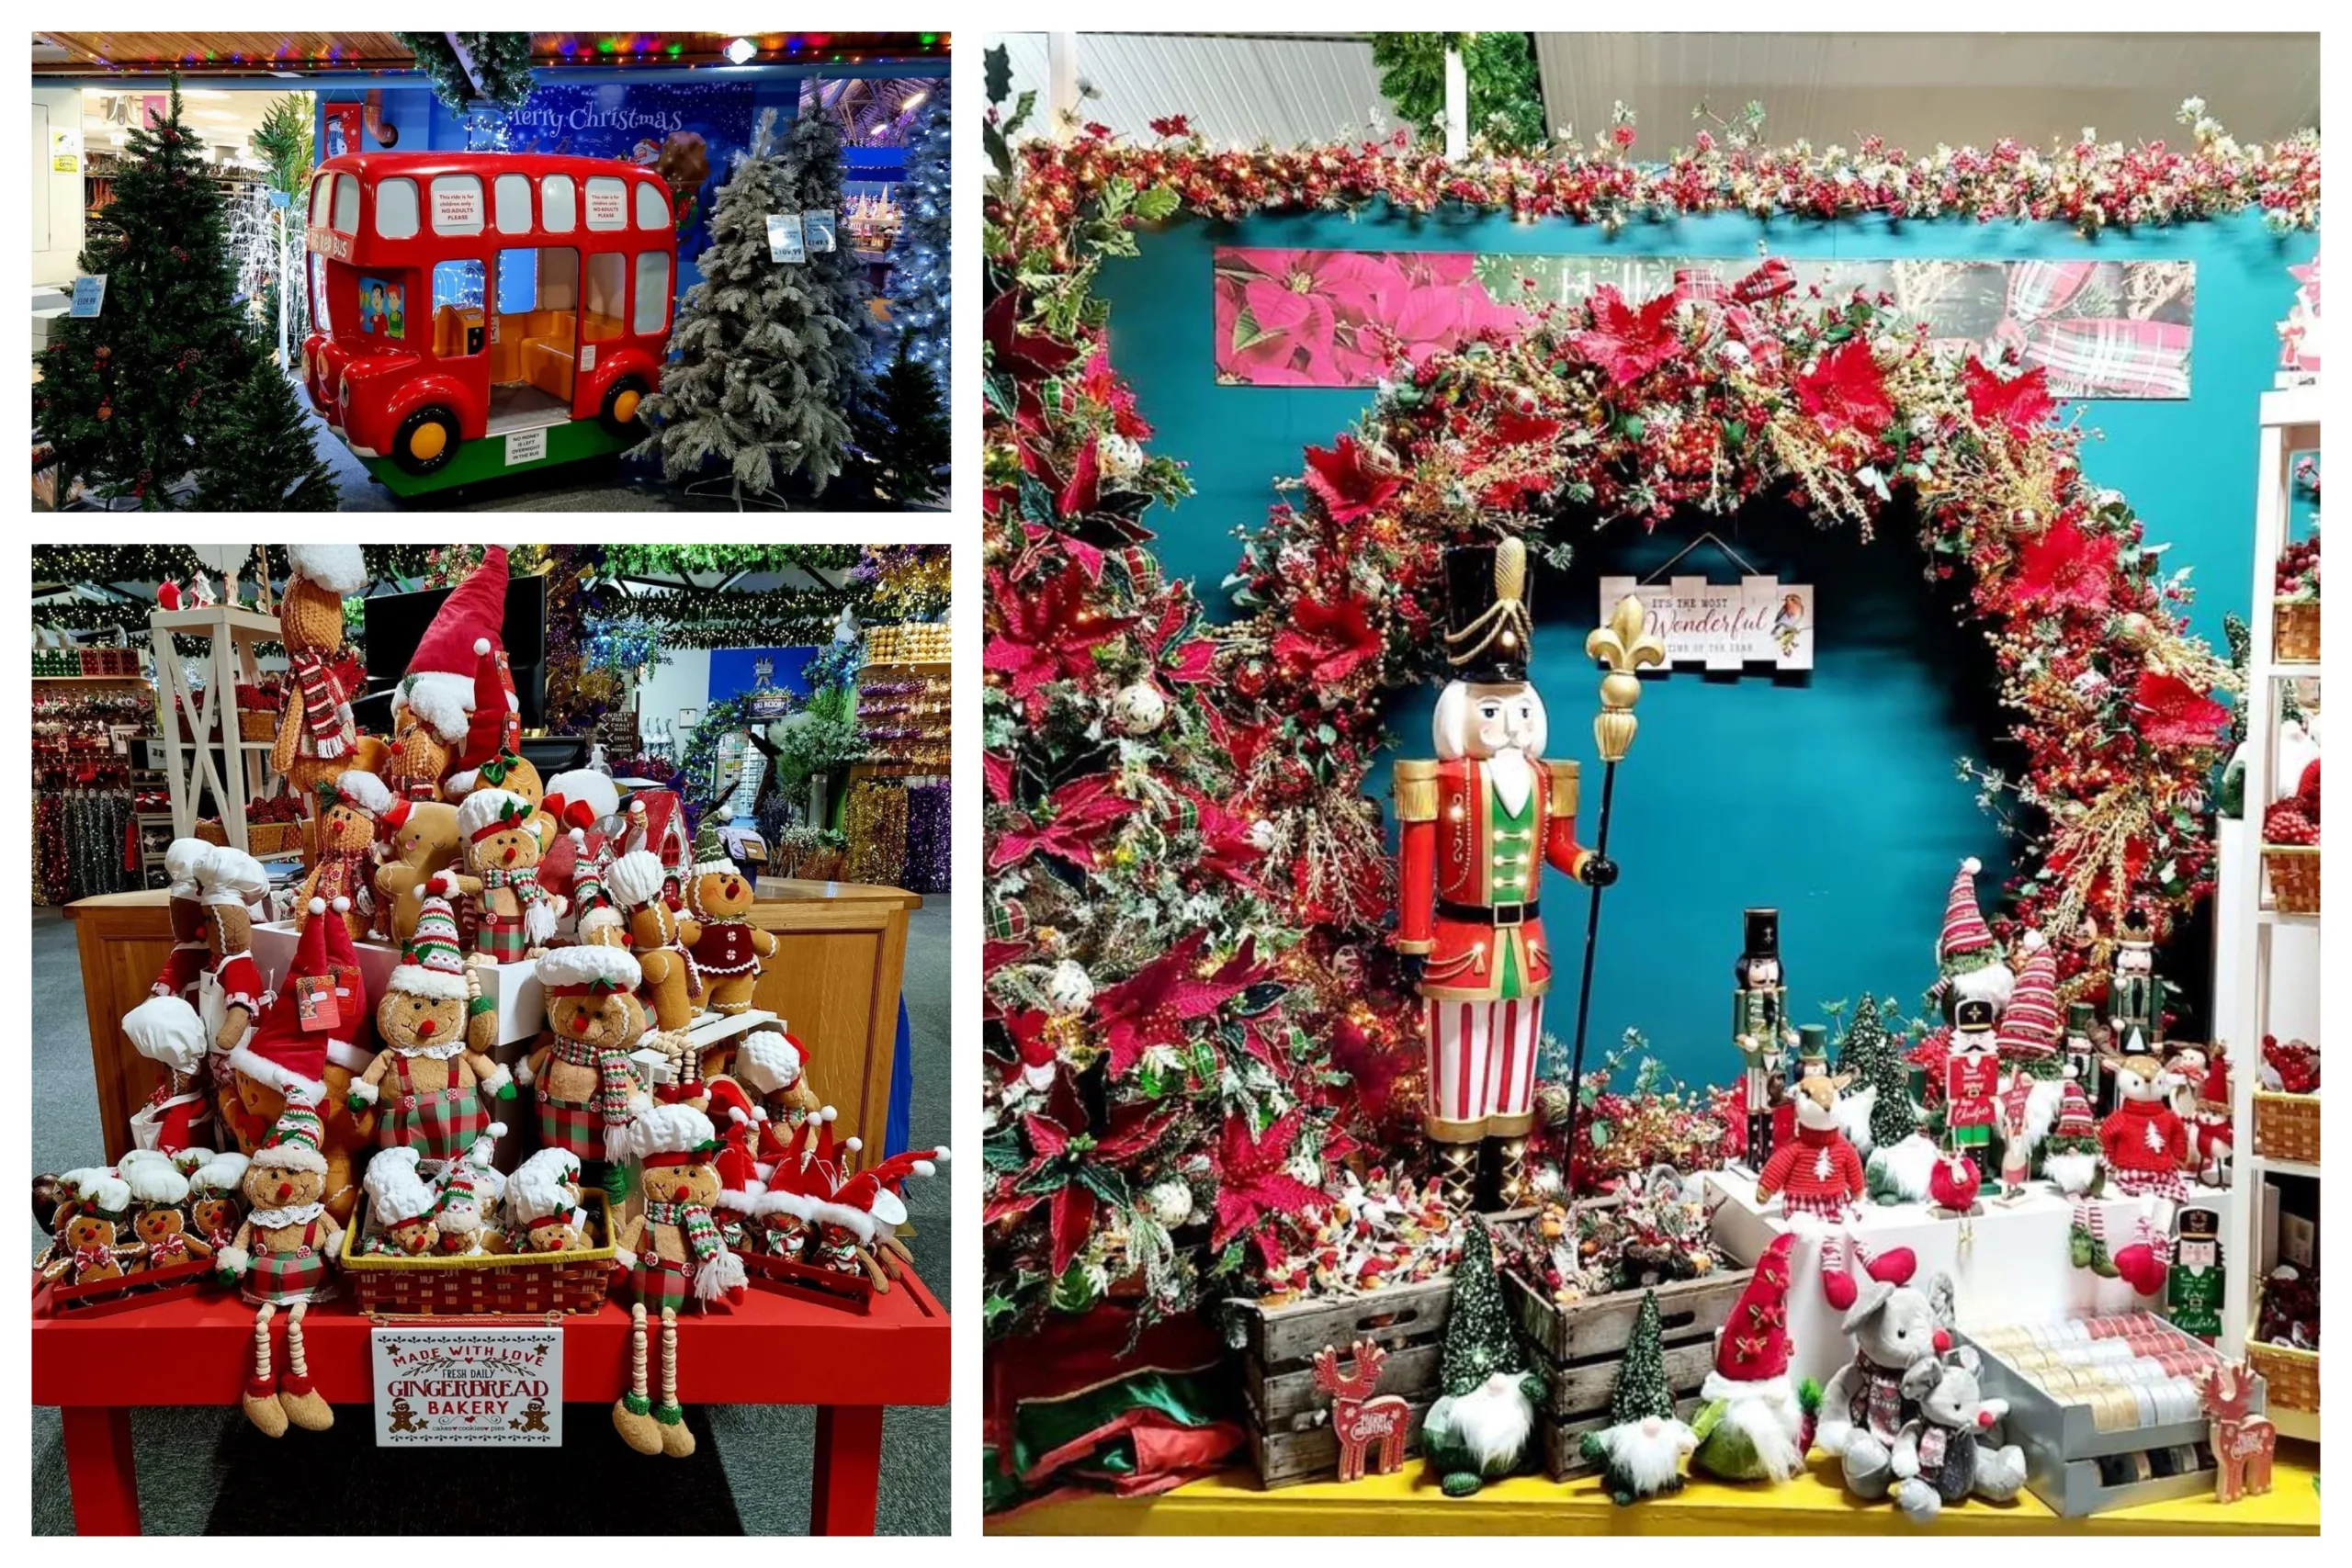 Not Kelly’s house, of course, but photos from some of the many Cambridgeshire stores where Christmas began during October.